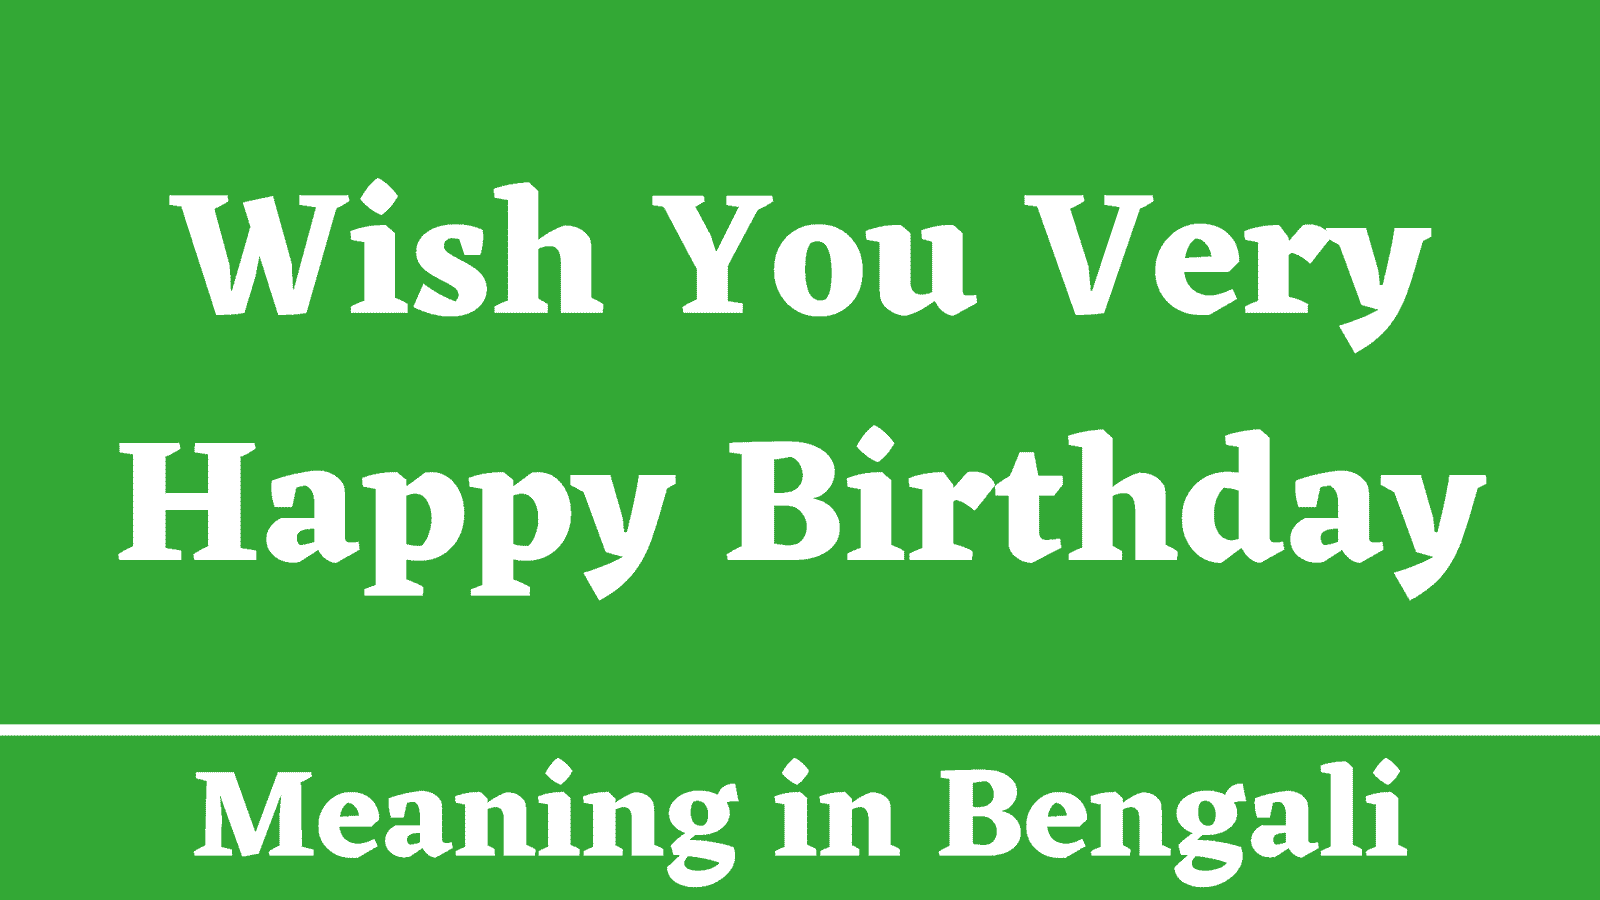 Wish You Very Happy Birthday Meaning in Bengali